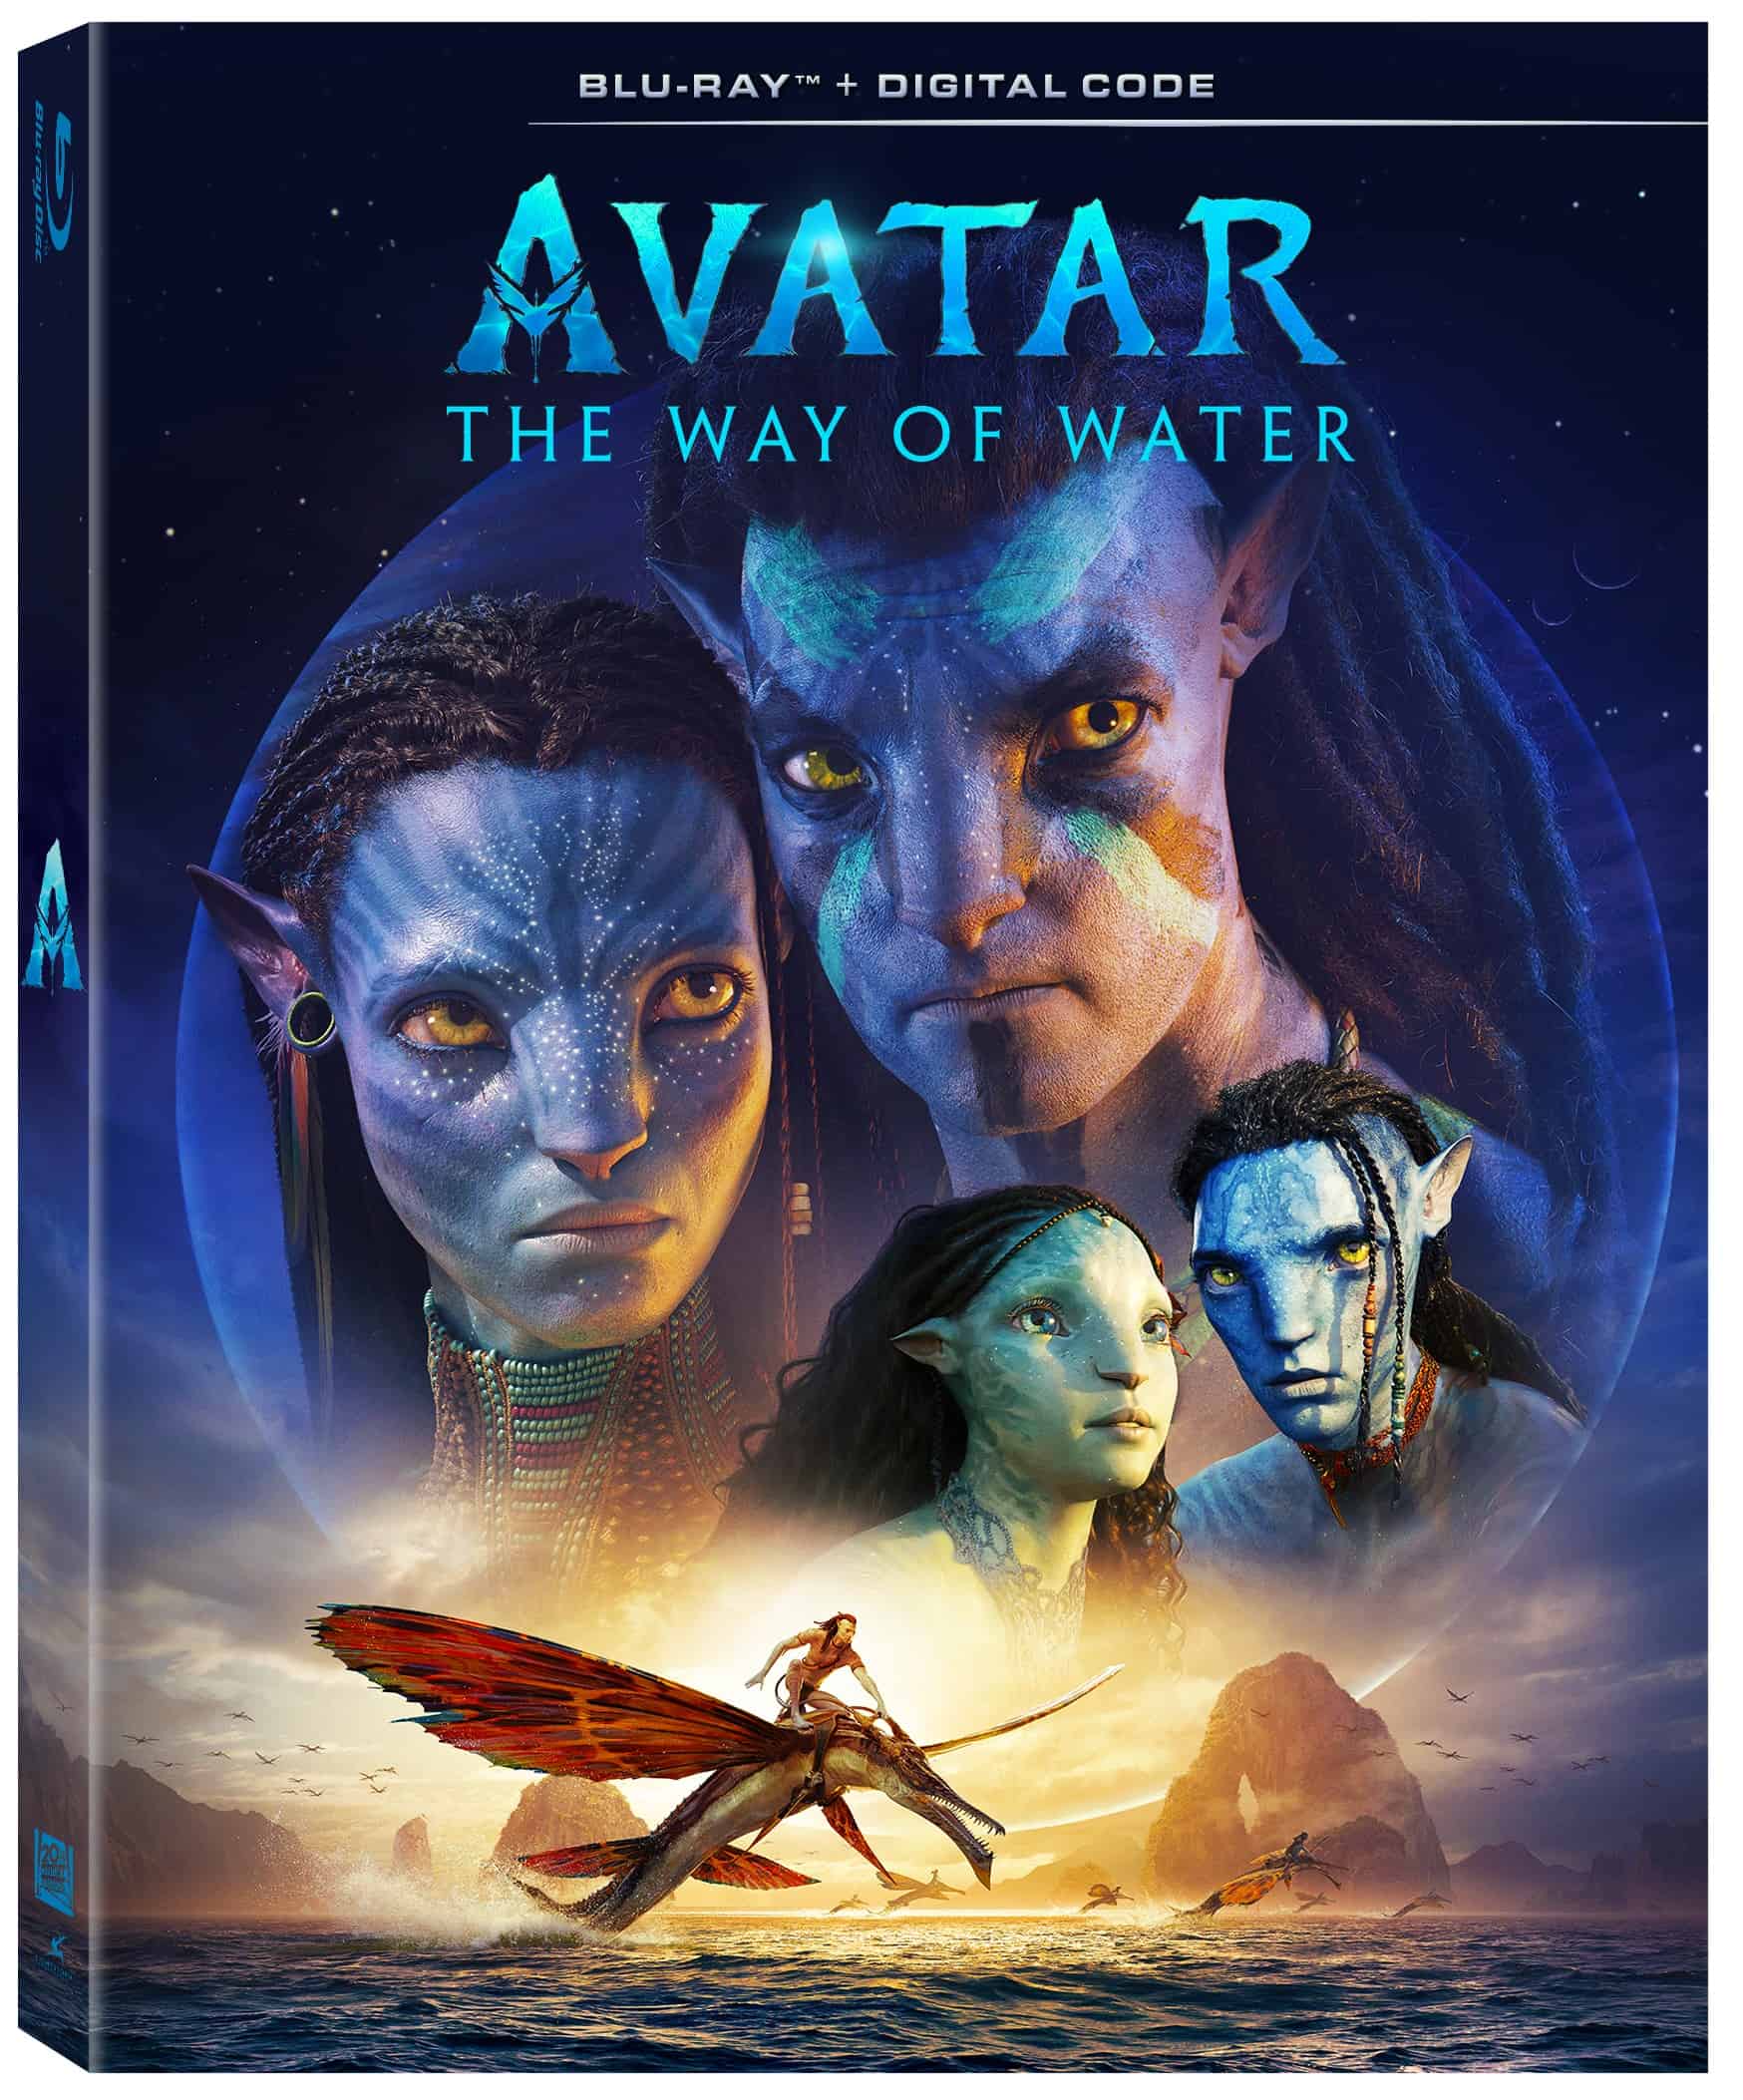 Double Celebration for Avatar Fans: The Arrival of Avatar: The Way of Water and the Ultimate Avatar Experience in 4K UHD 18